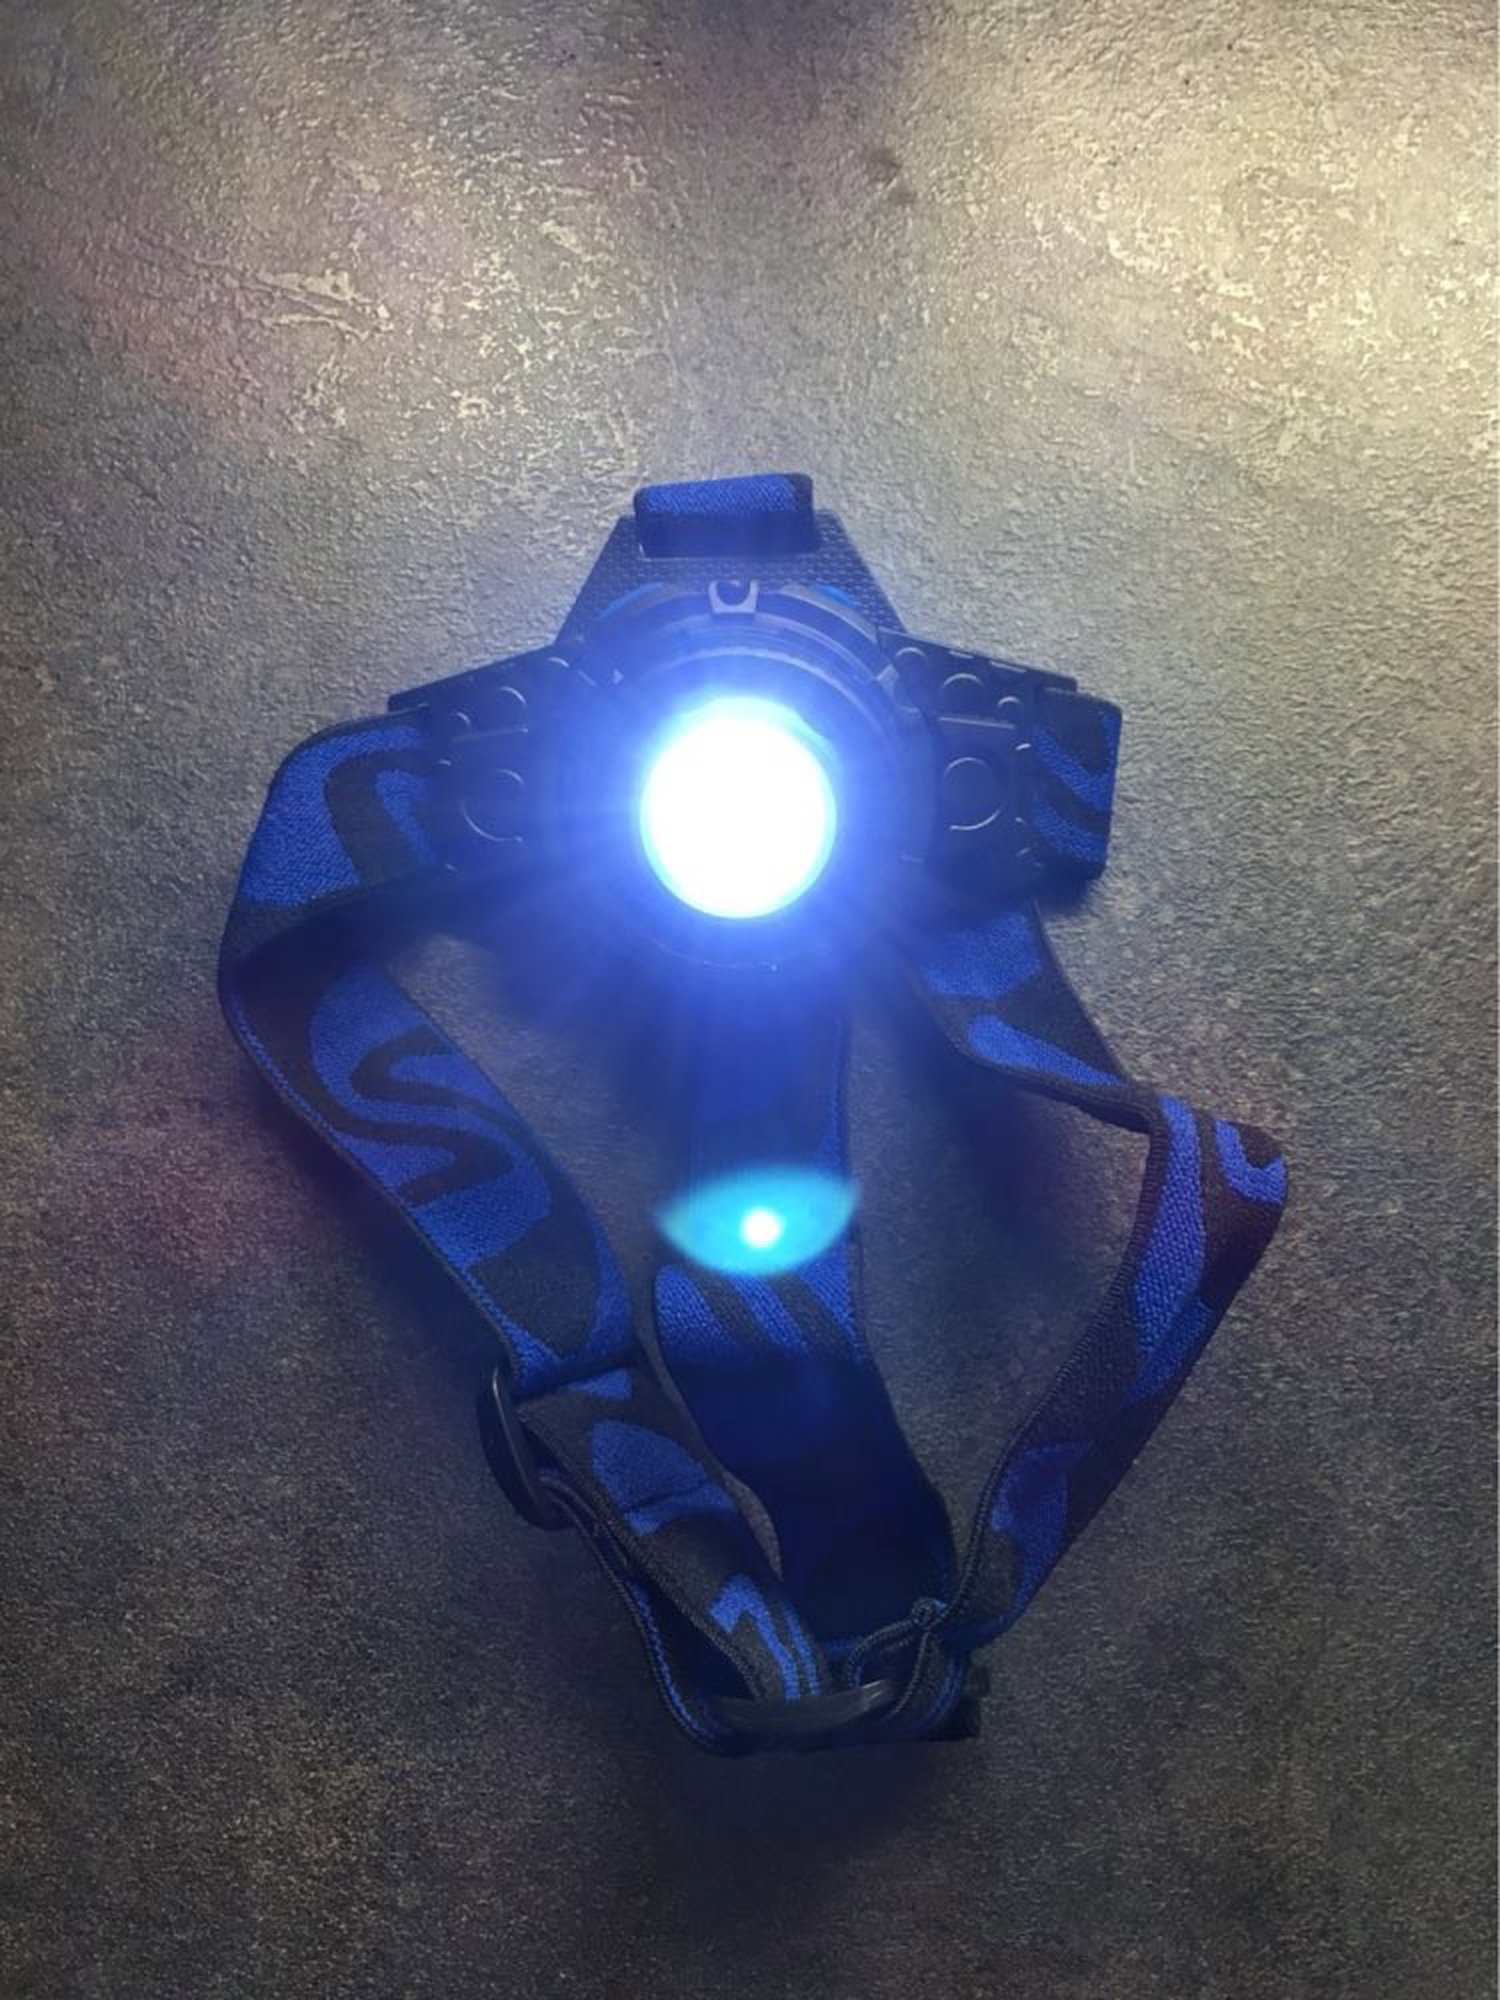 Photo by alierotic2 with the username @alierotic2,  April 23, 2017 at 2:50 PM and the text says 'Cree Q5 LED Frontal Led Headlamp Headlight Flashlight Rechargeable Linternas Lampe Torch Head lamp Build-In Battery + Charger
Buyer: D*n M. (detail)
Via: http://www.aliexpress.com/item//32490262070.html #cree  #q5  #led  #frontal  #headlamp  #headlight..'